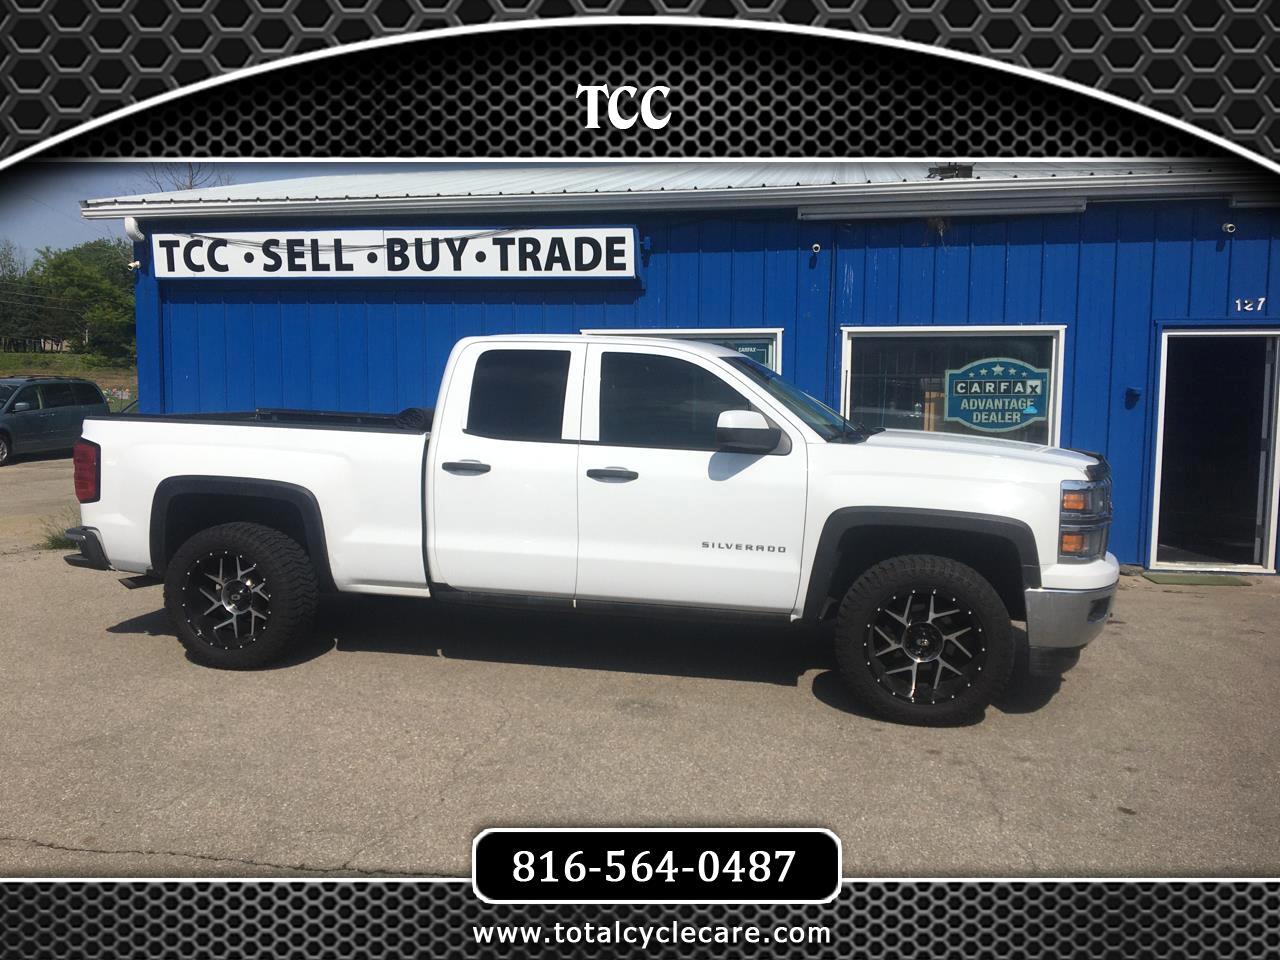 Used 14 Chevrolet Silverado 1500 4wd Double Cab 143 5 Lt W 2lt For Sale In Smithville Kansas City Mo 640 Tcc